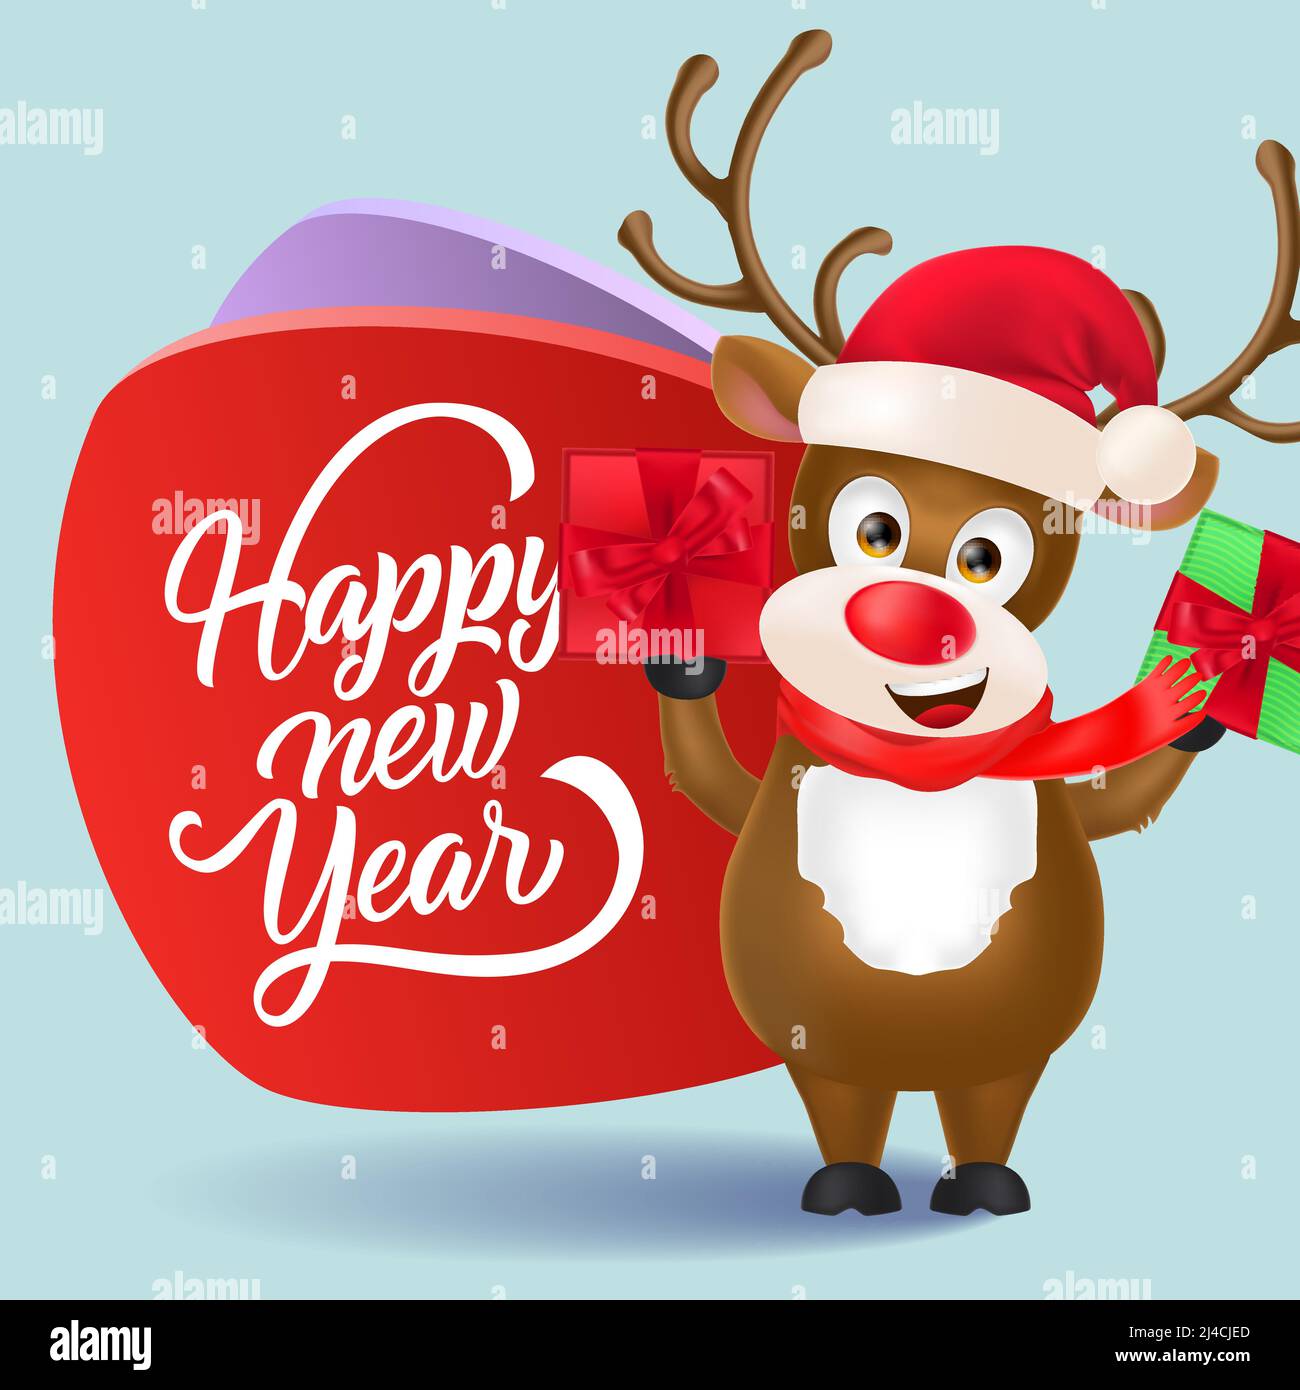 Page Alamy For 3 Images rudolph - santa Stock Vector - and